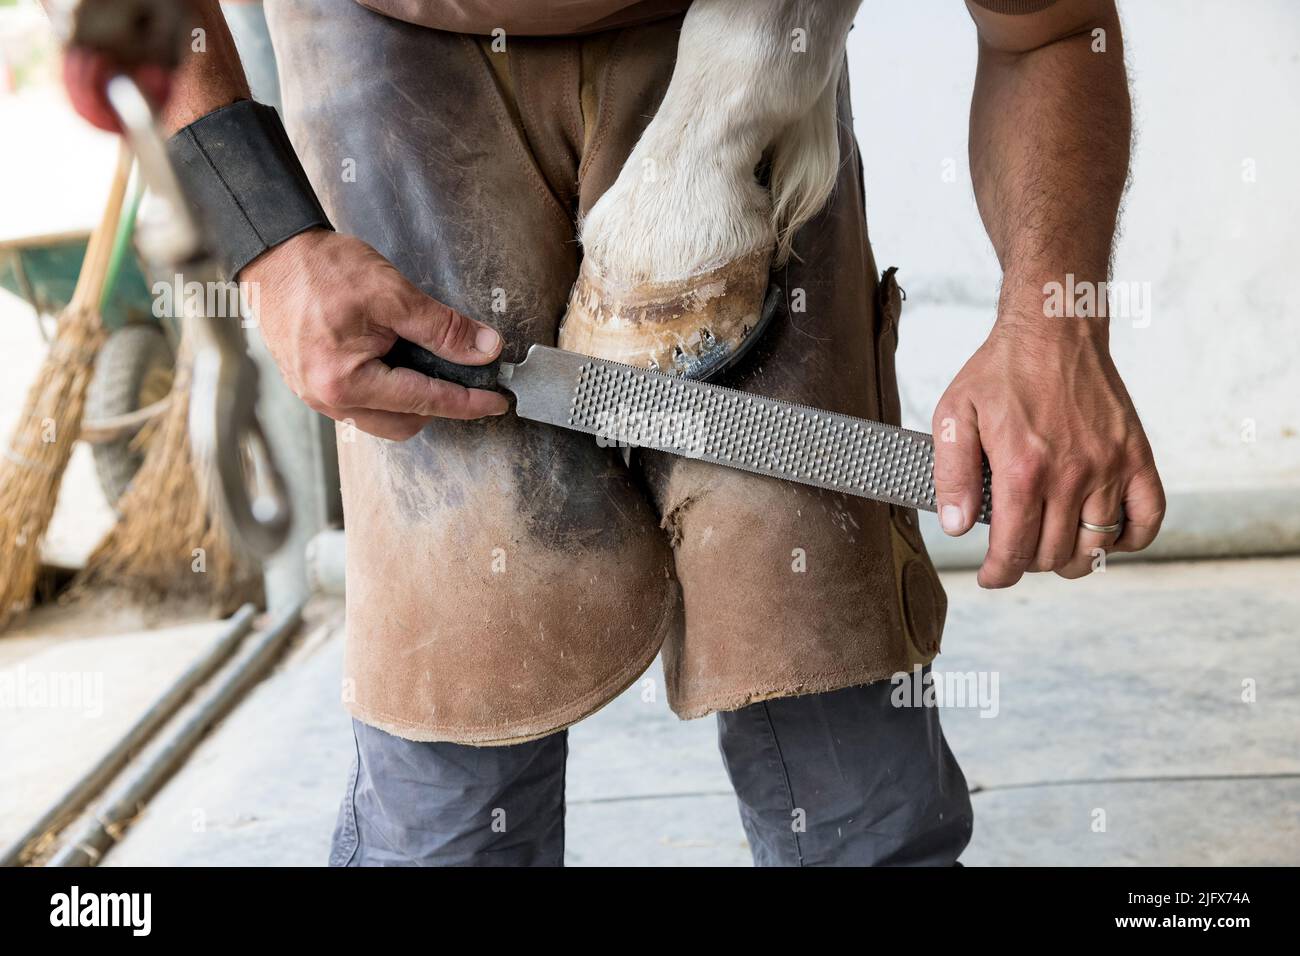 Unrecognizable male farrier in leather apron removing excess keratin from horse hoof with rough file while working outside workshop in daytime on farm Stock Photo